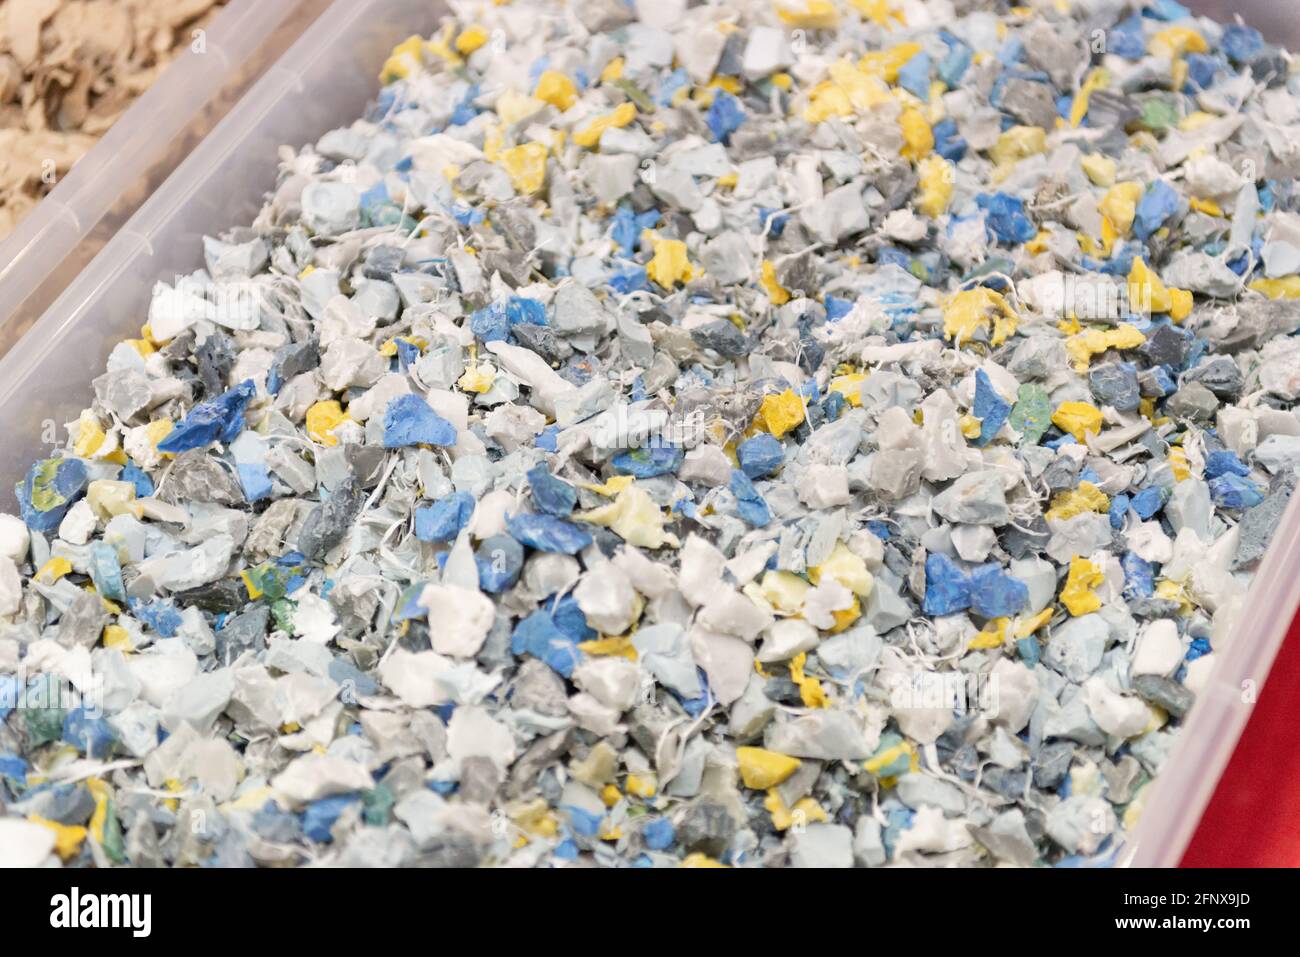 Fractions of recyclable materials after recycling. Pulverized materials before reuse in factories. Stock Photo